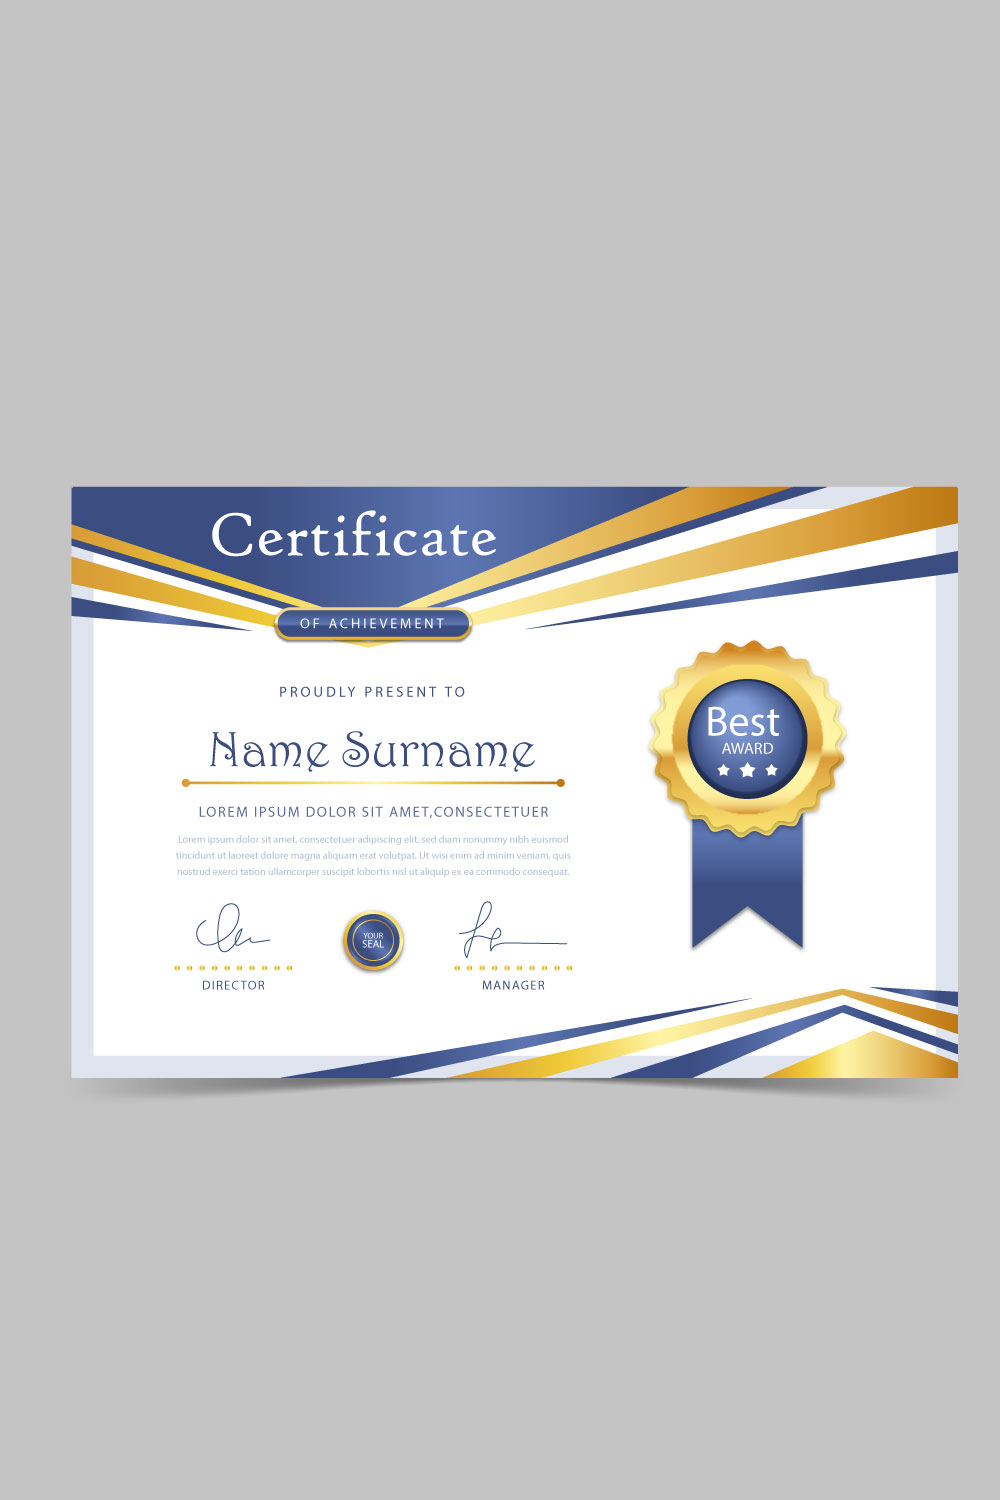 Ranking Certificate Blue and Gold Design pinterest image.